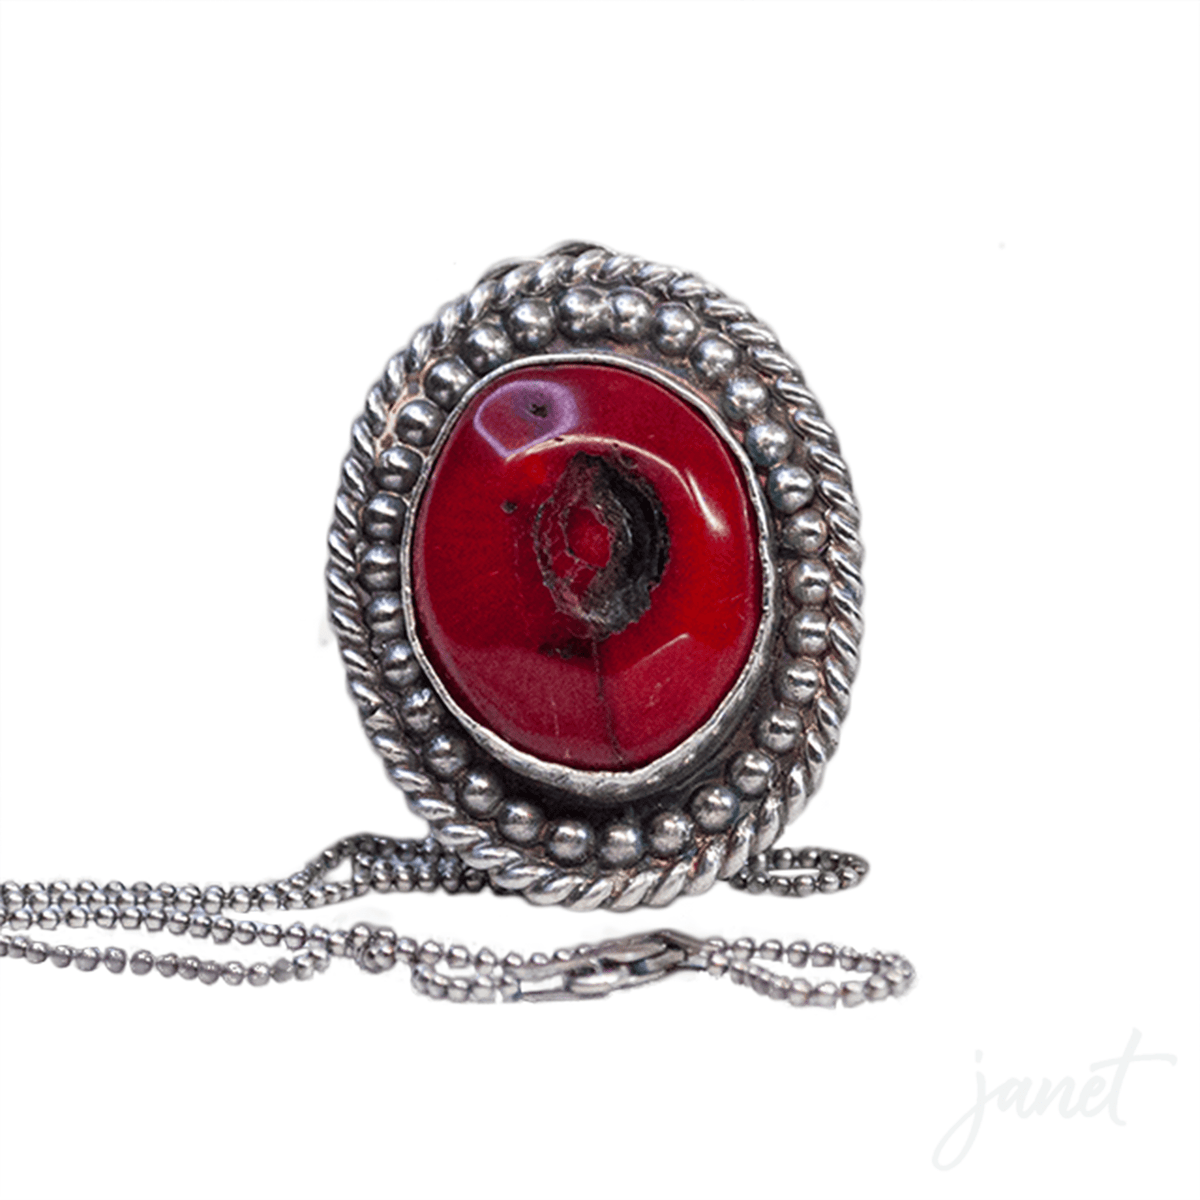 janet lasher Jewelry Necklace Red Bamboo Coral Beaded &amp; Rope Edged Oval Pendant and Chain